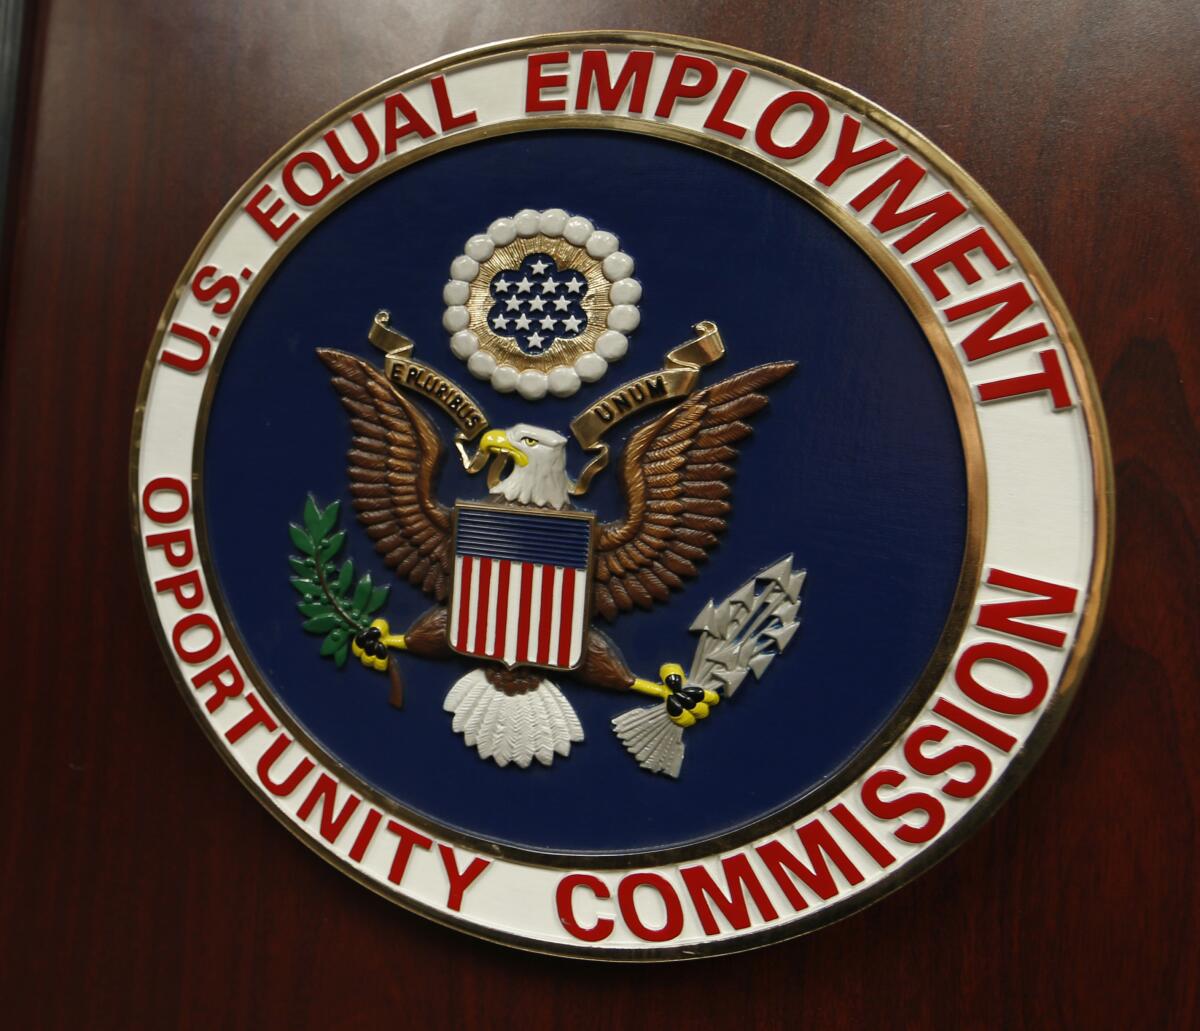 The emblem of the U.S. Equal Employment Opportunity Commission is shown on a podium 